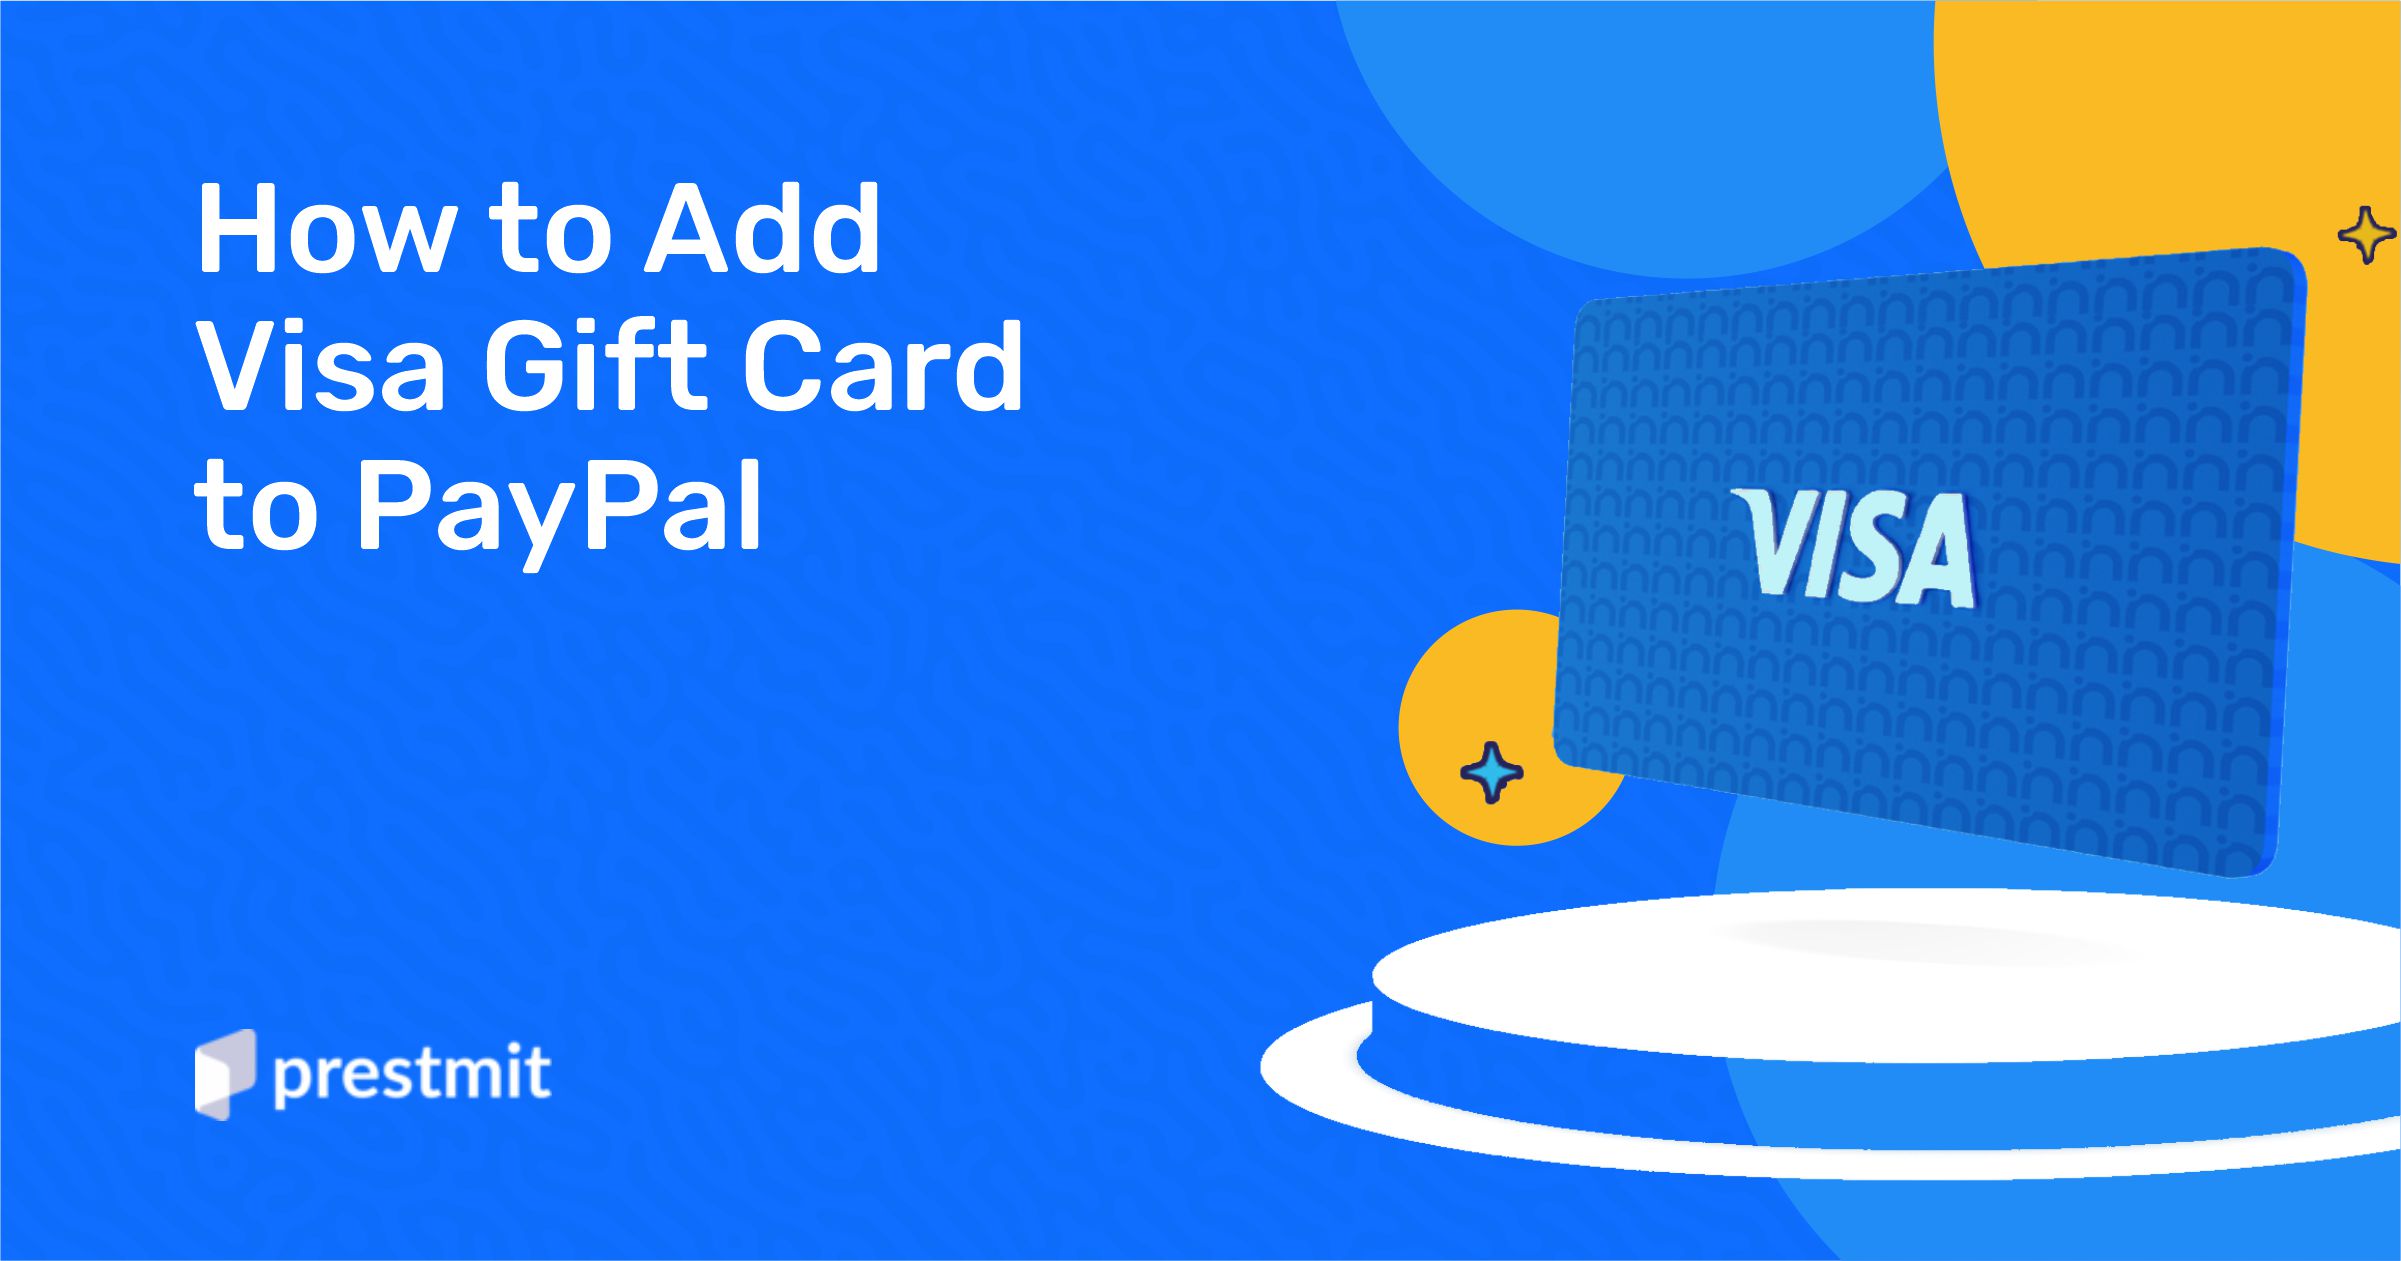 Gift Card on LinkedIn: Get Paypal Gift Card for Free now:  https://lnkd.in/fs5VfcJ www.vipgc.us